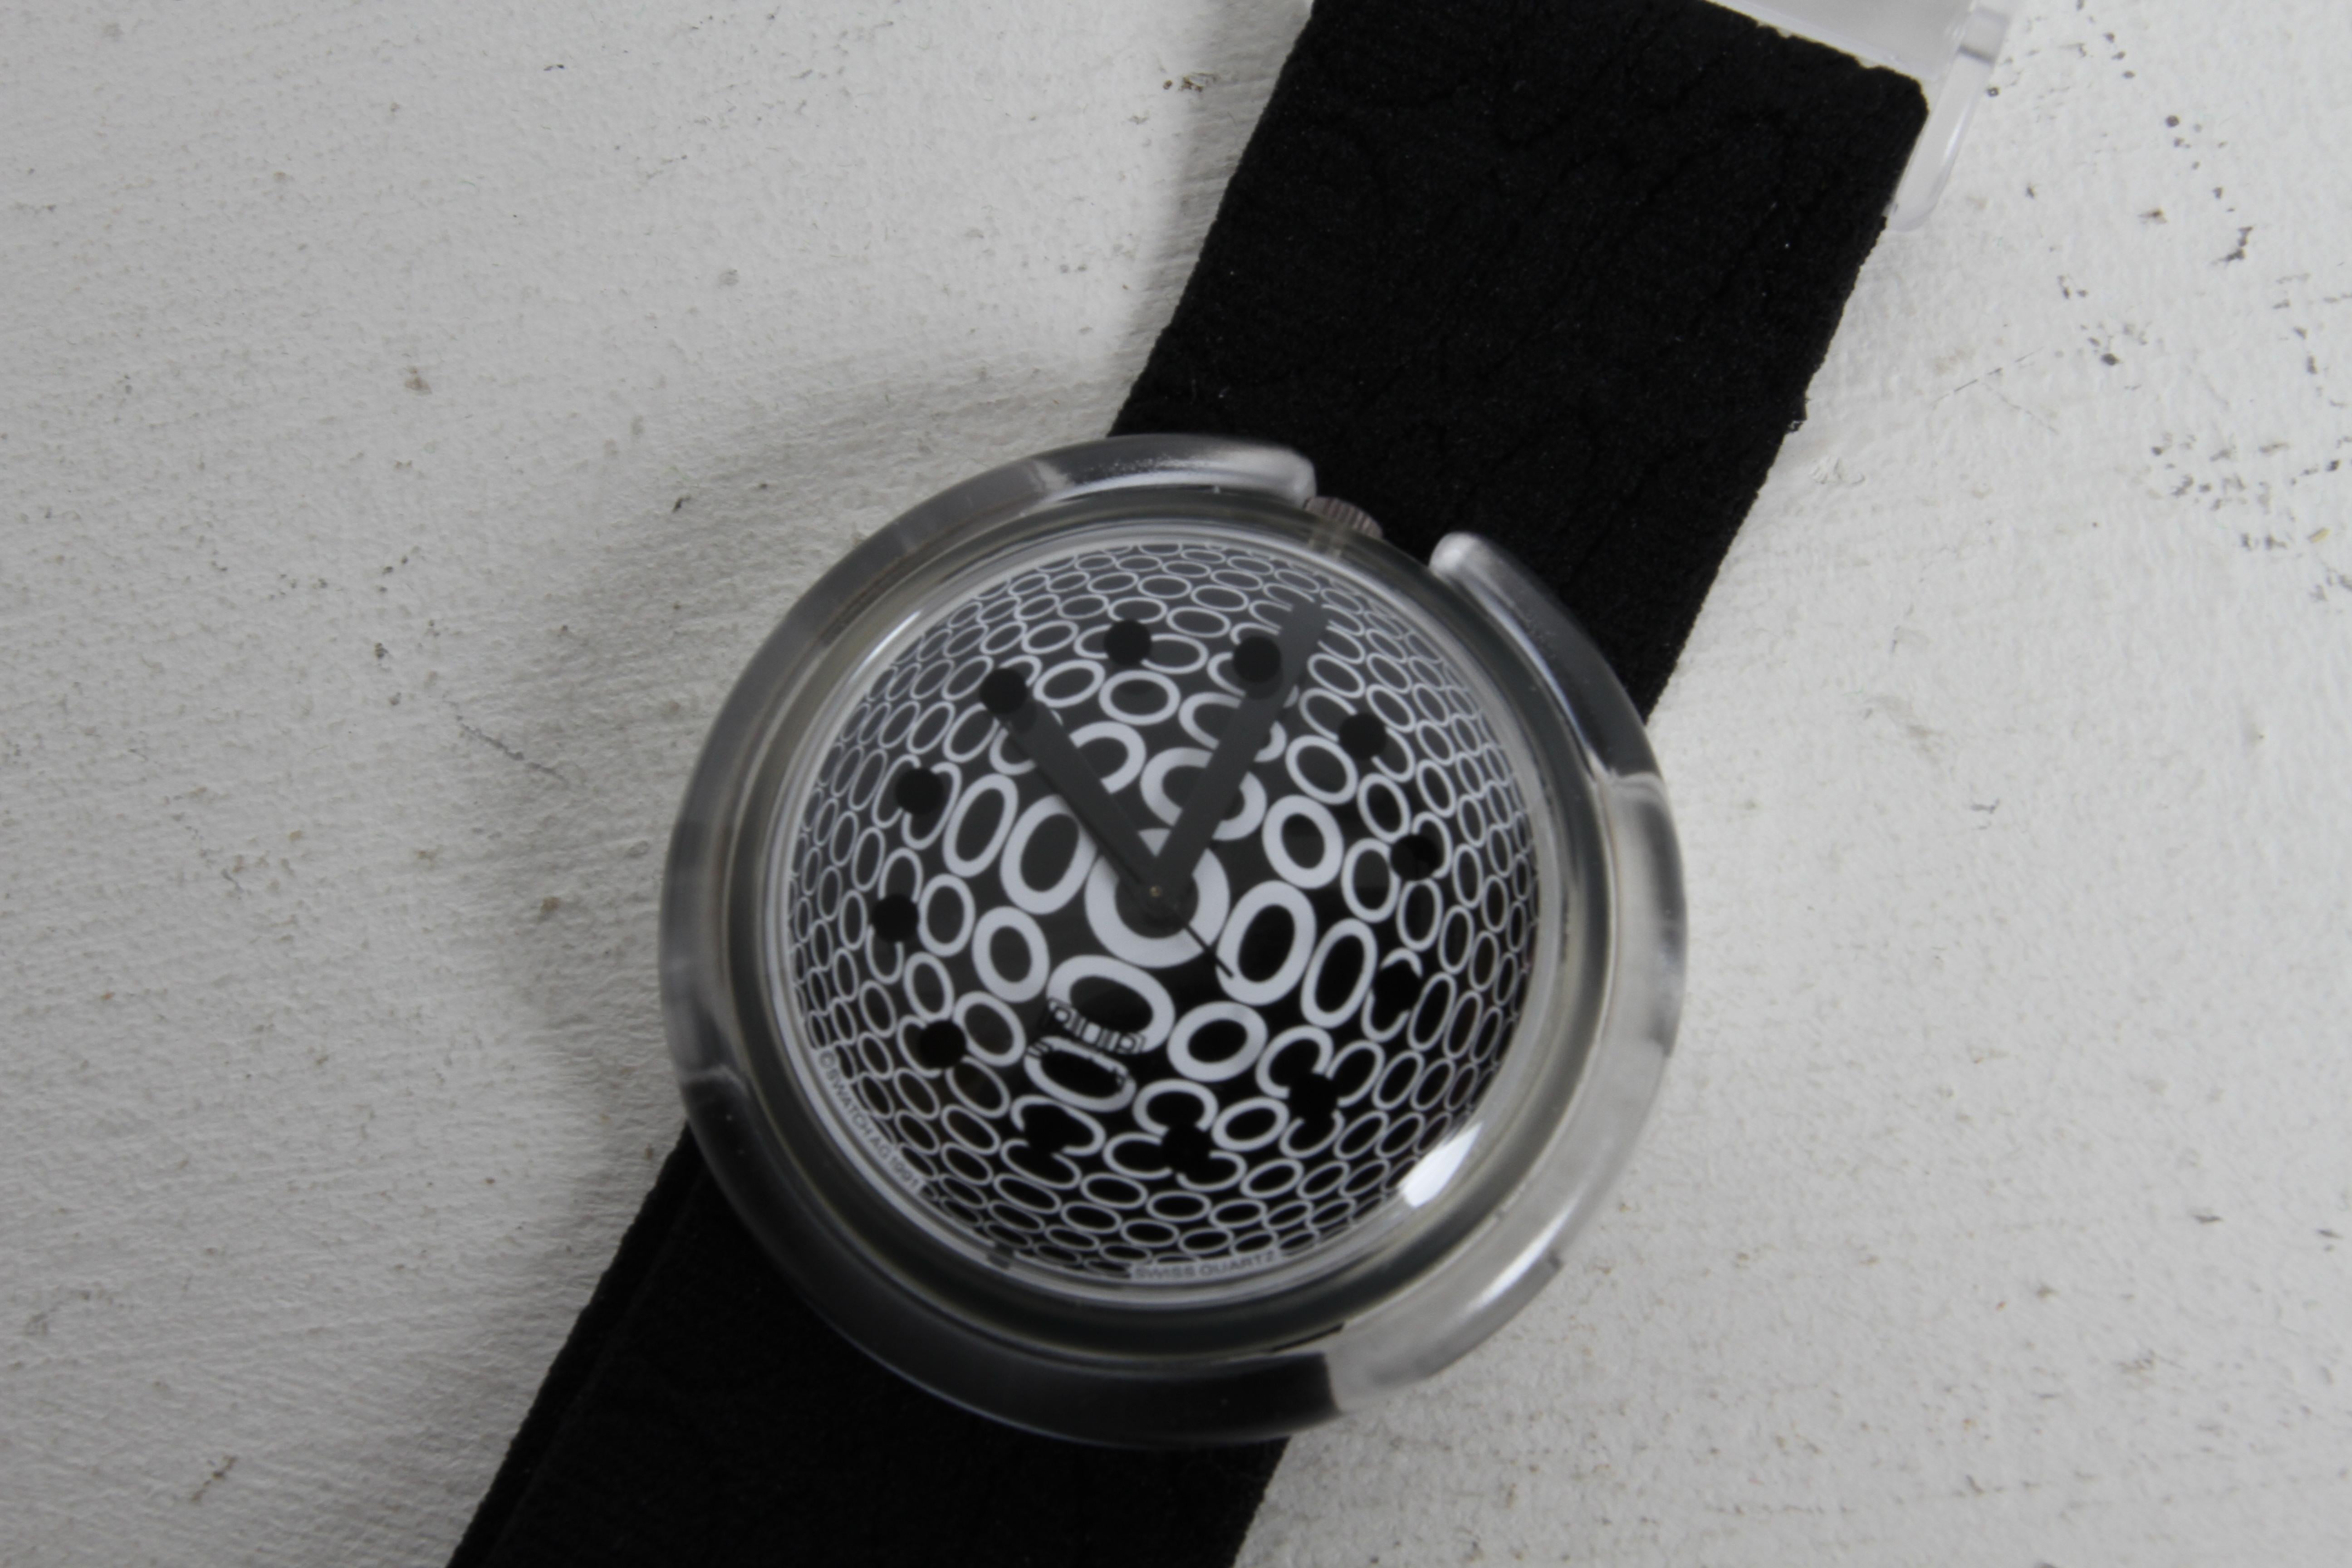 1992 Vintage POP Swatch Watch Special Dots - Op Art - Designed by Vasarely - NOS For Sale 8